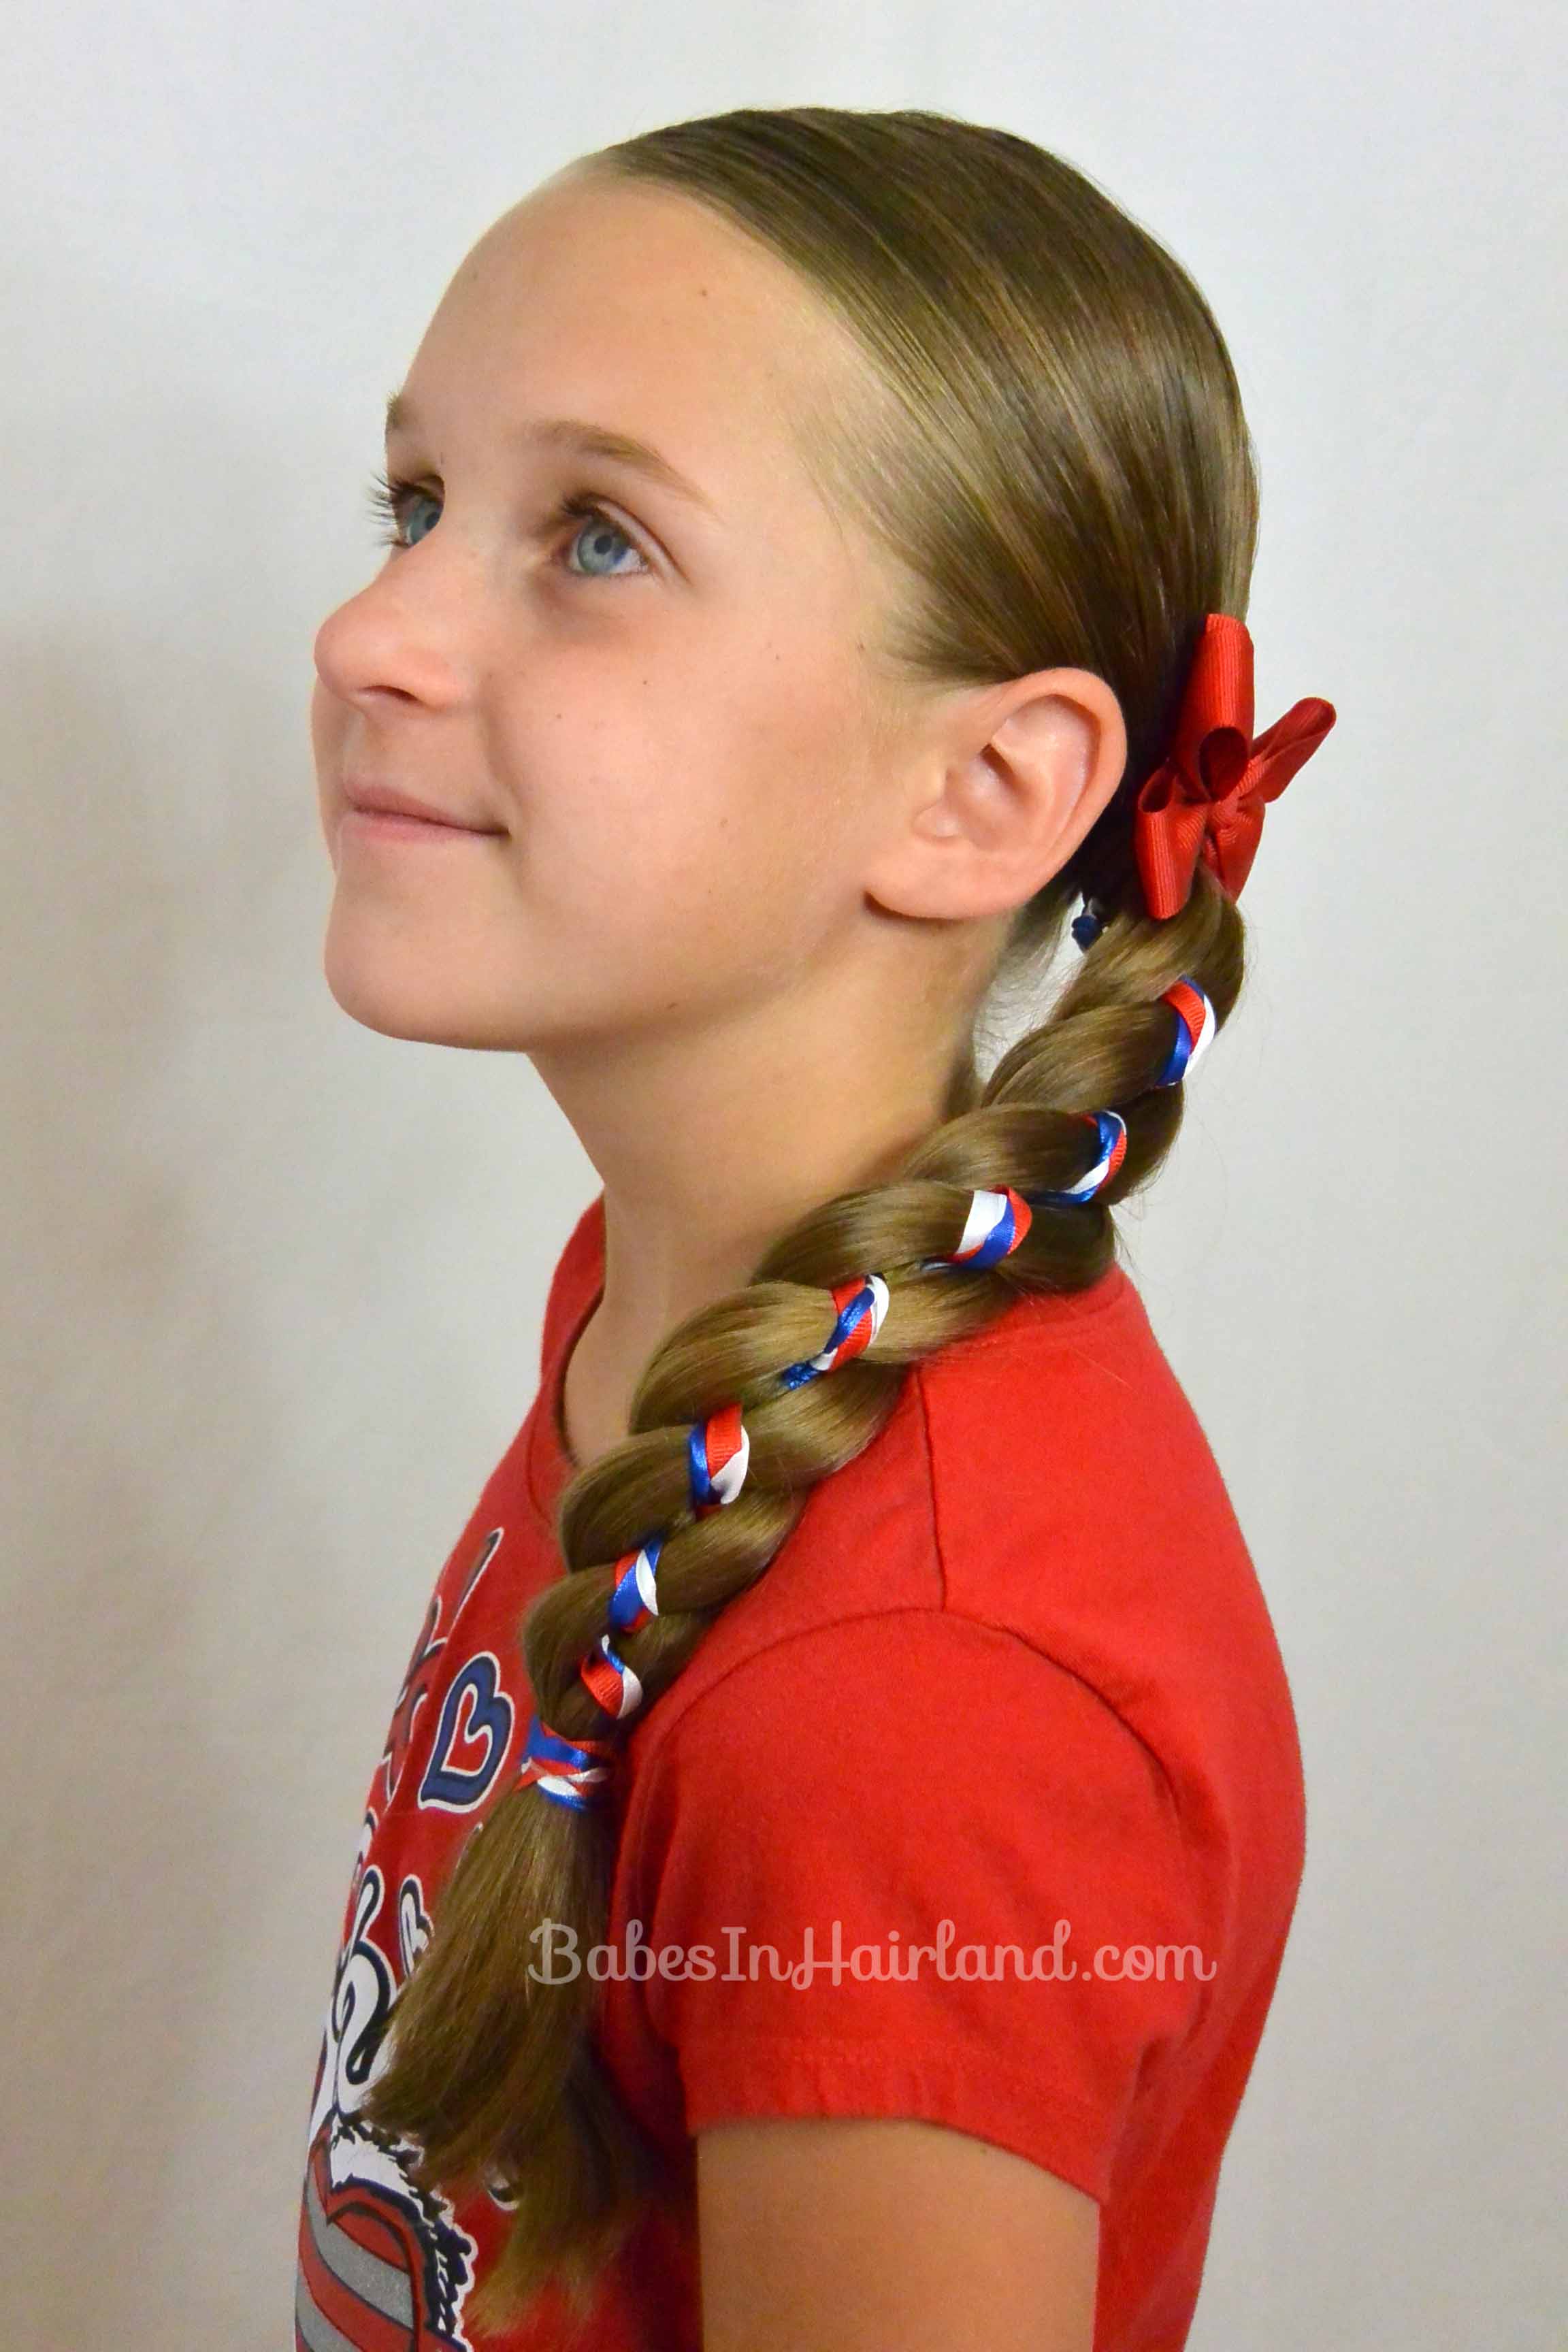 Ribbon Braid in a 4 Strand Braid | 4th of July Hairstyle - Babes In Hairland